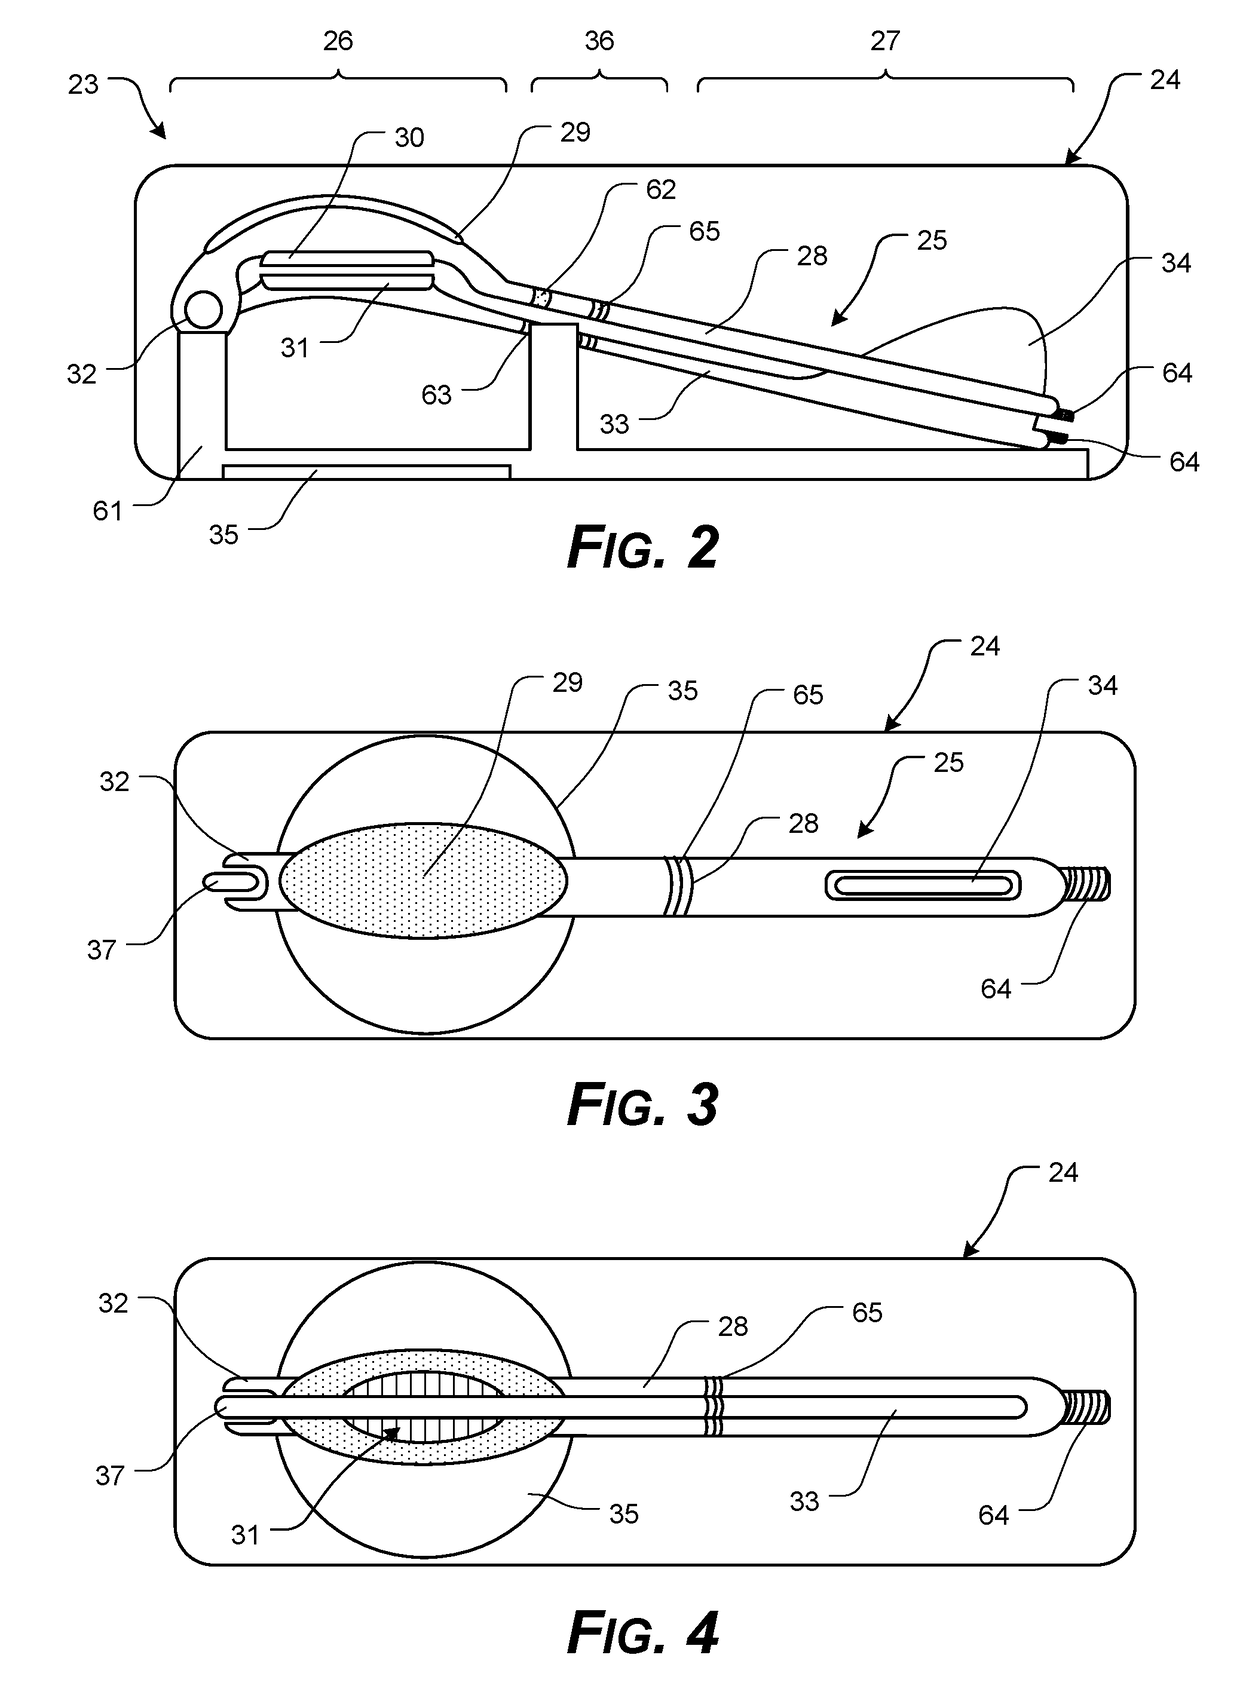 Corneal Transplant Systems, Methods, and Apparatuses